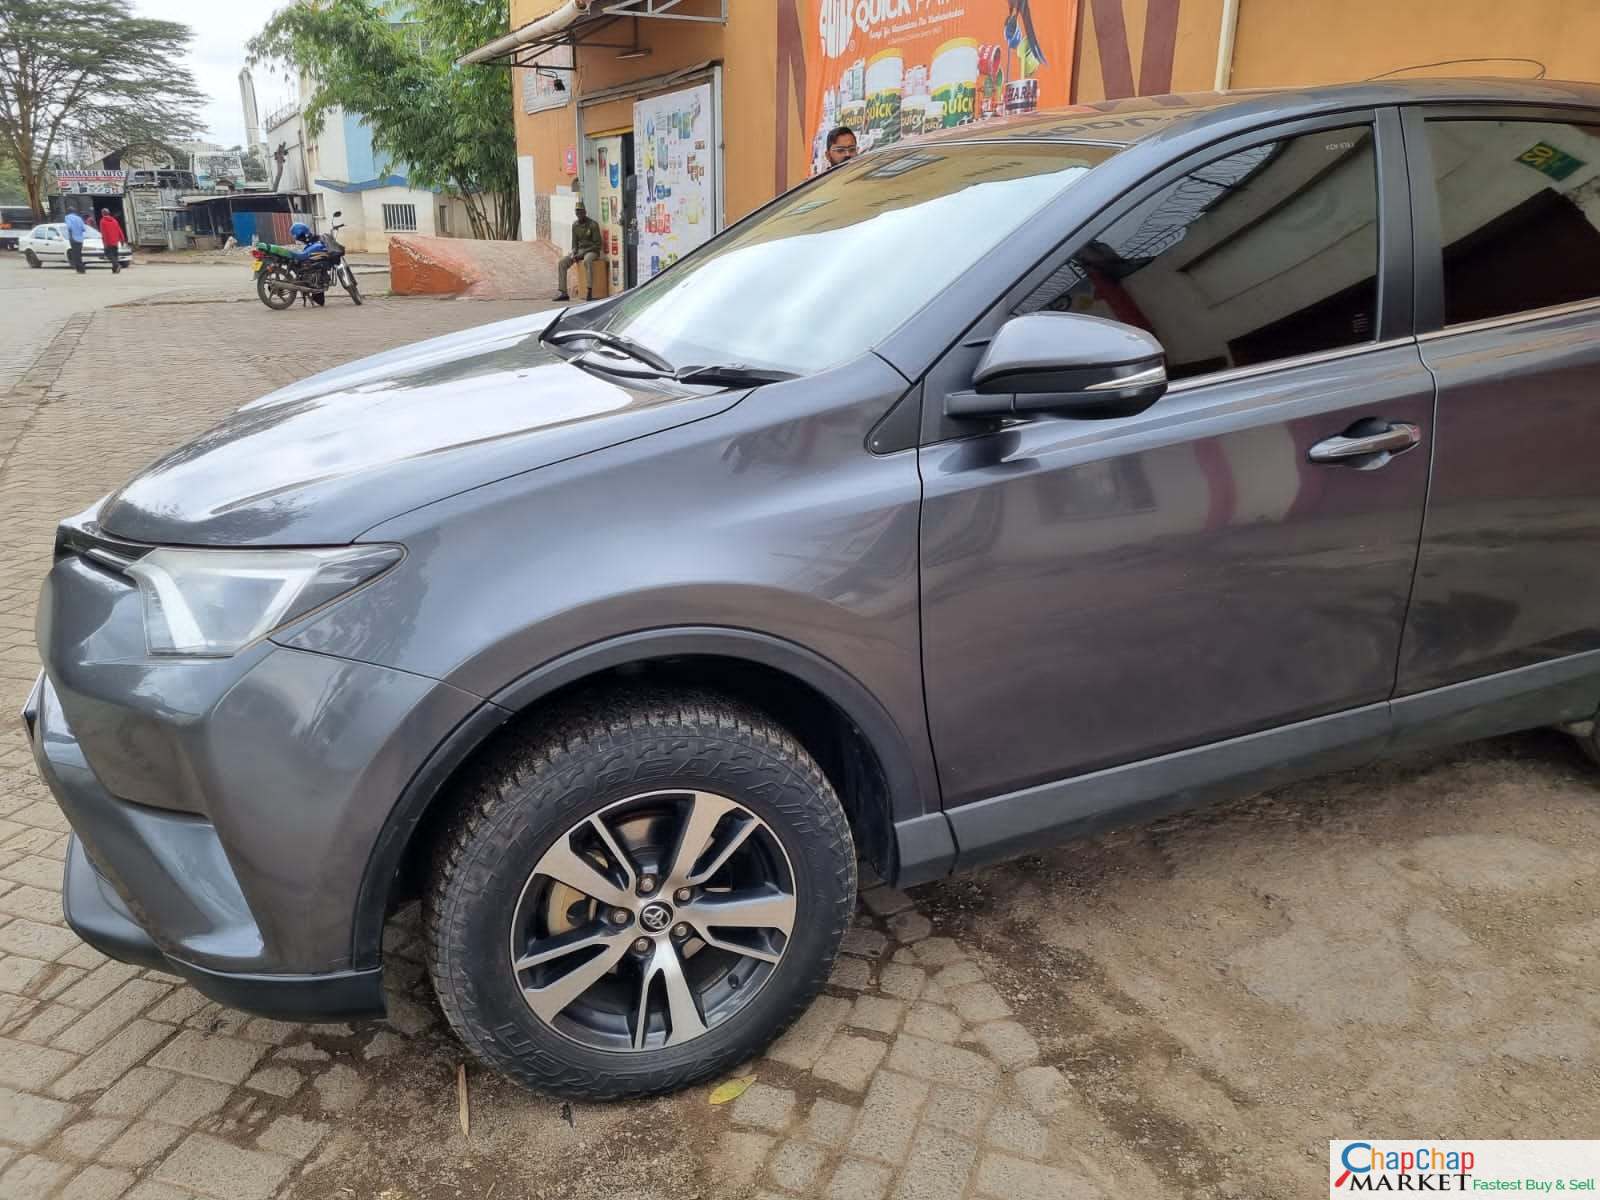 Cars Cars For Sale-Toyota RAV4 kenya new shape local assembly You Pay 30% Deposit Trade in OK Toyota RAV4 for sale in kenya hire purchase installments EXCLUSIVE 9